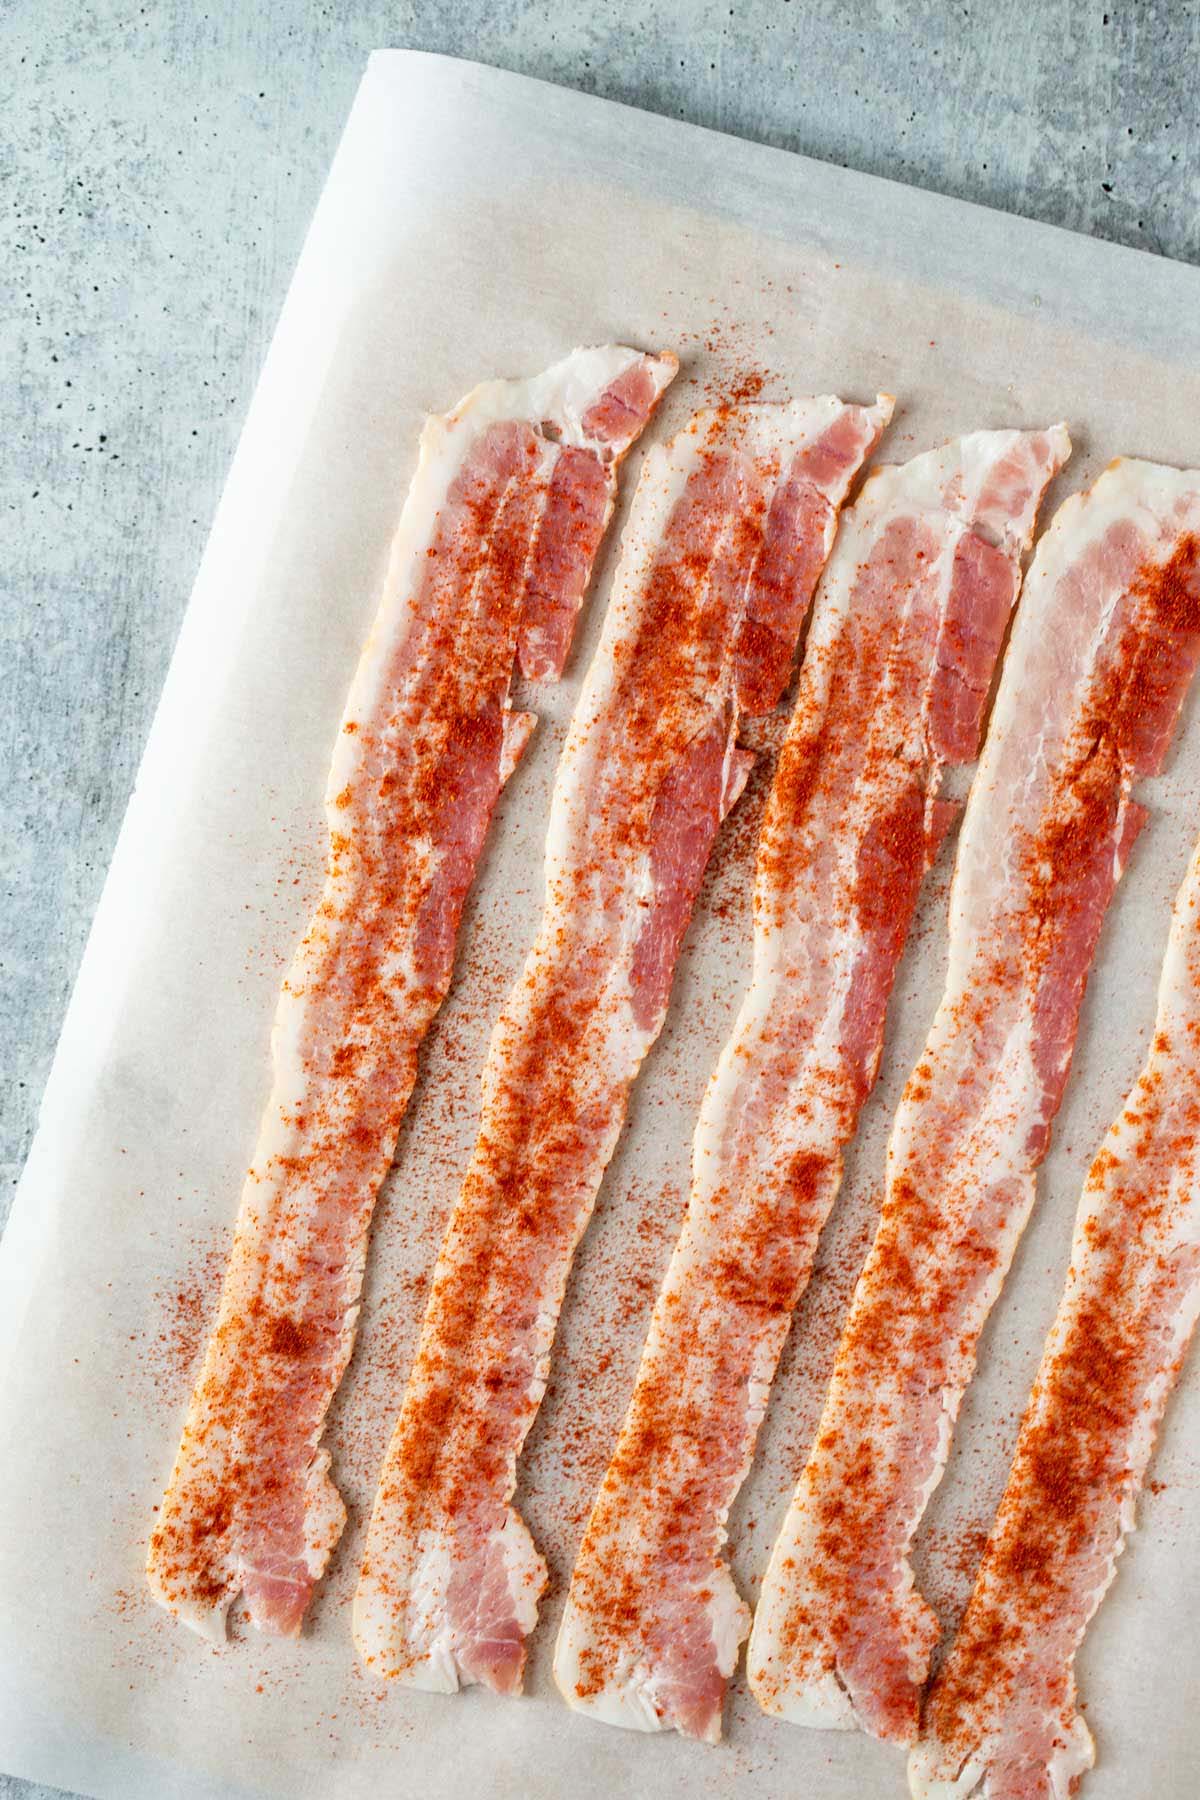 Bacon strips sprinkled with seasoning.